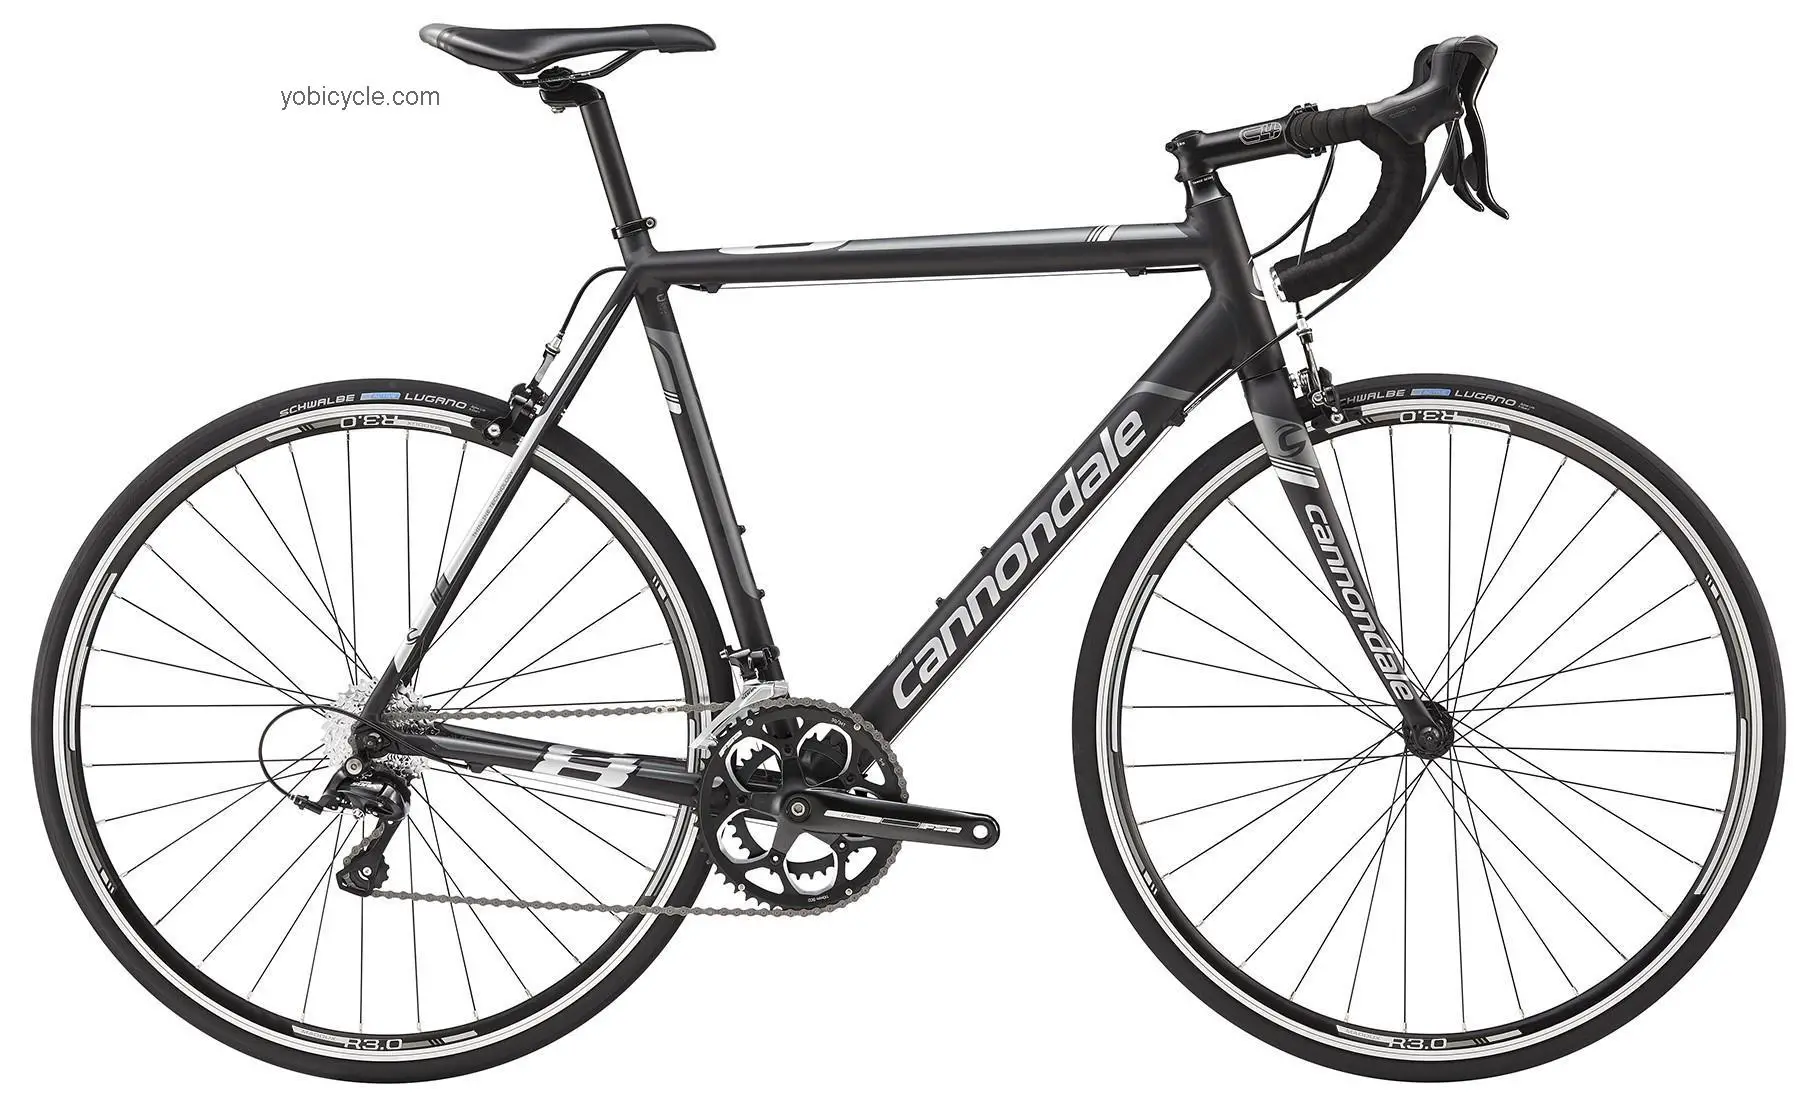 Cannondale CAAD8 SORA 7 2015 comparison online with competitors